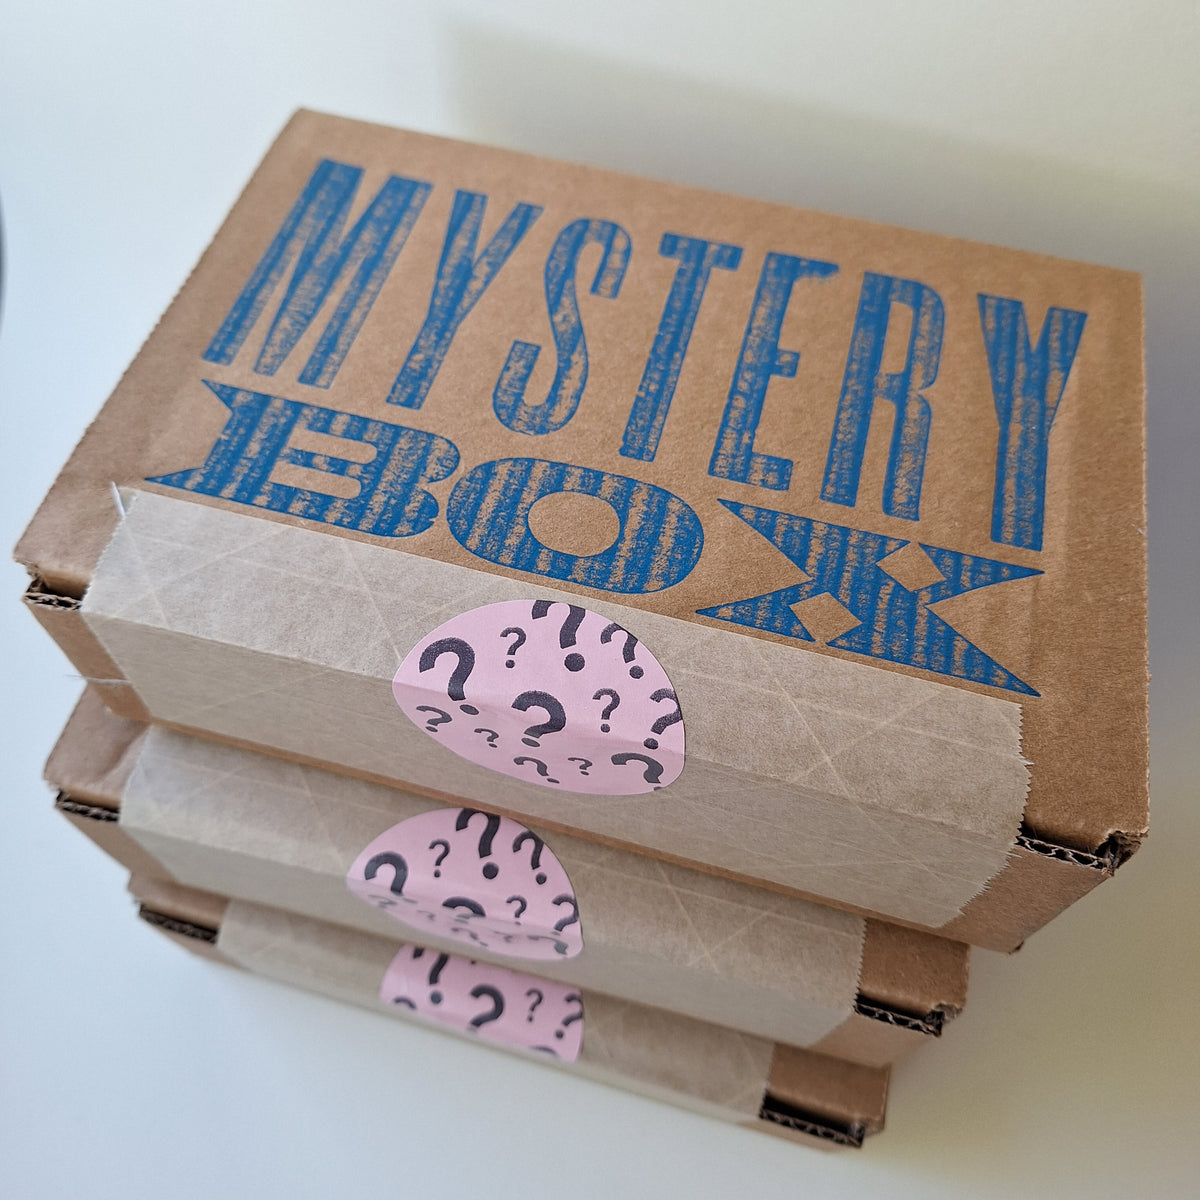 Mystery Bag Sticker Mystery Bag Prints Mystery Prints Greeting Card Gift  for Her Mystery Box Lucky Dip Gifts Under 10 -  Canada